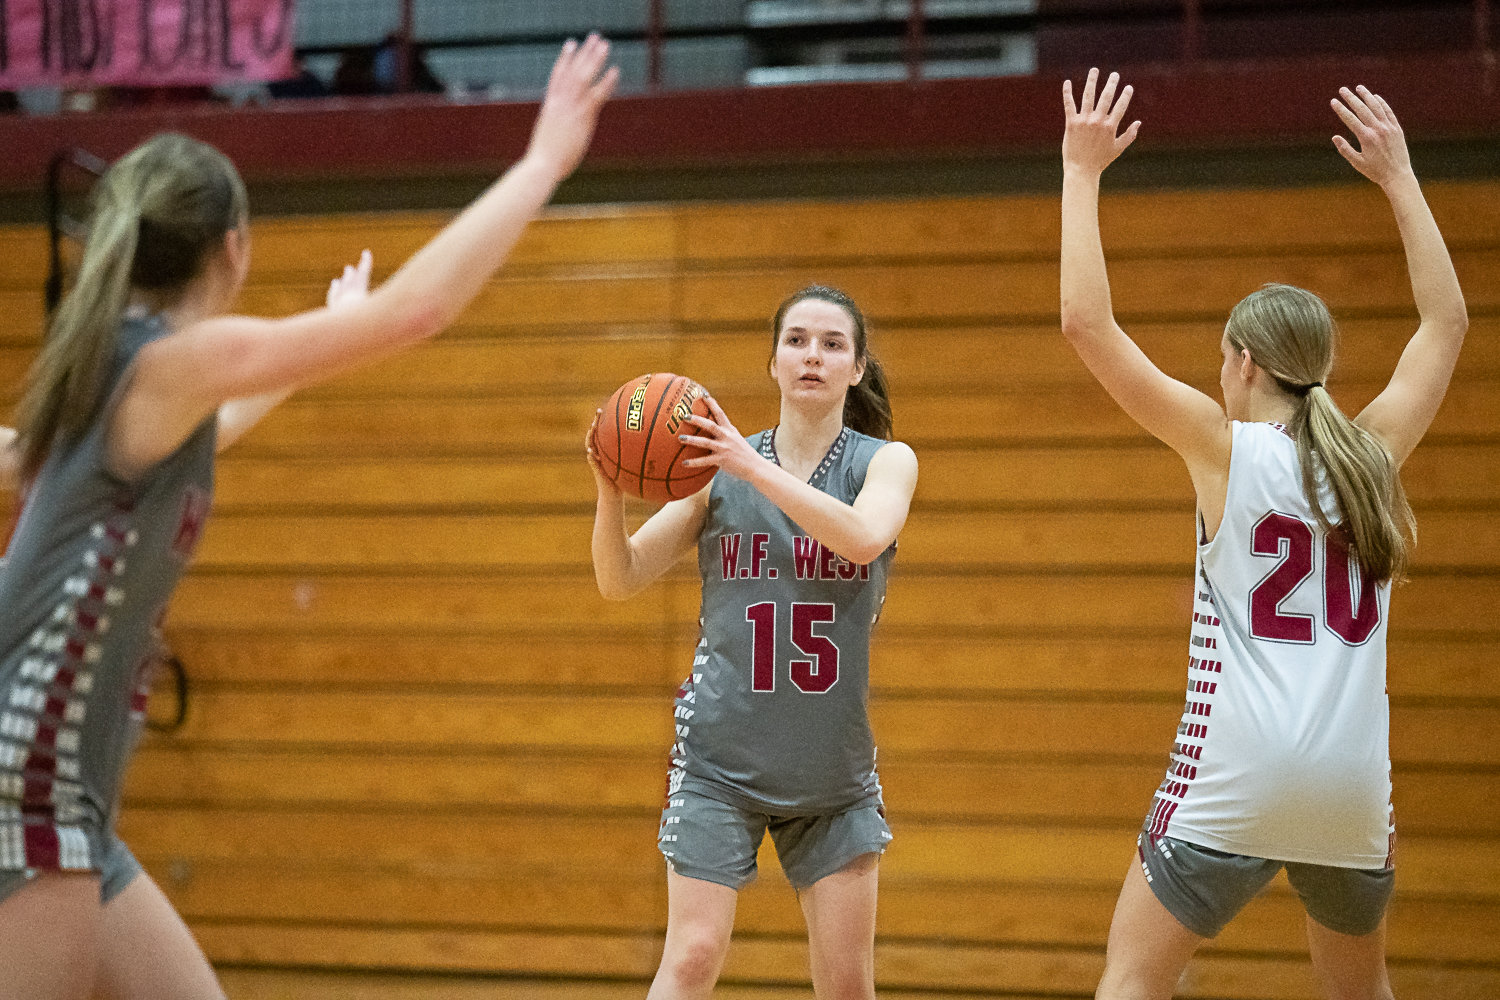 W.F. West point guard Amanda Bennett looks to pass during a drill at practice Nov. 22.